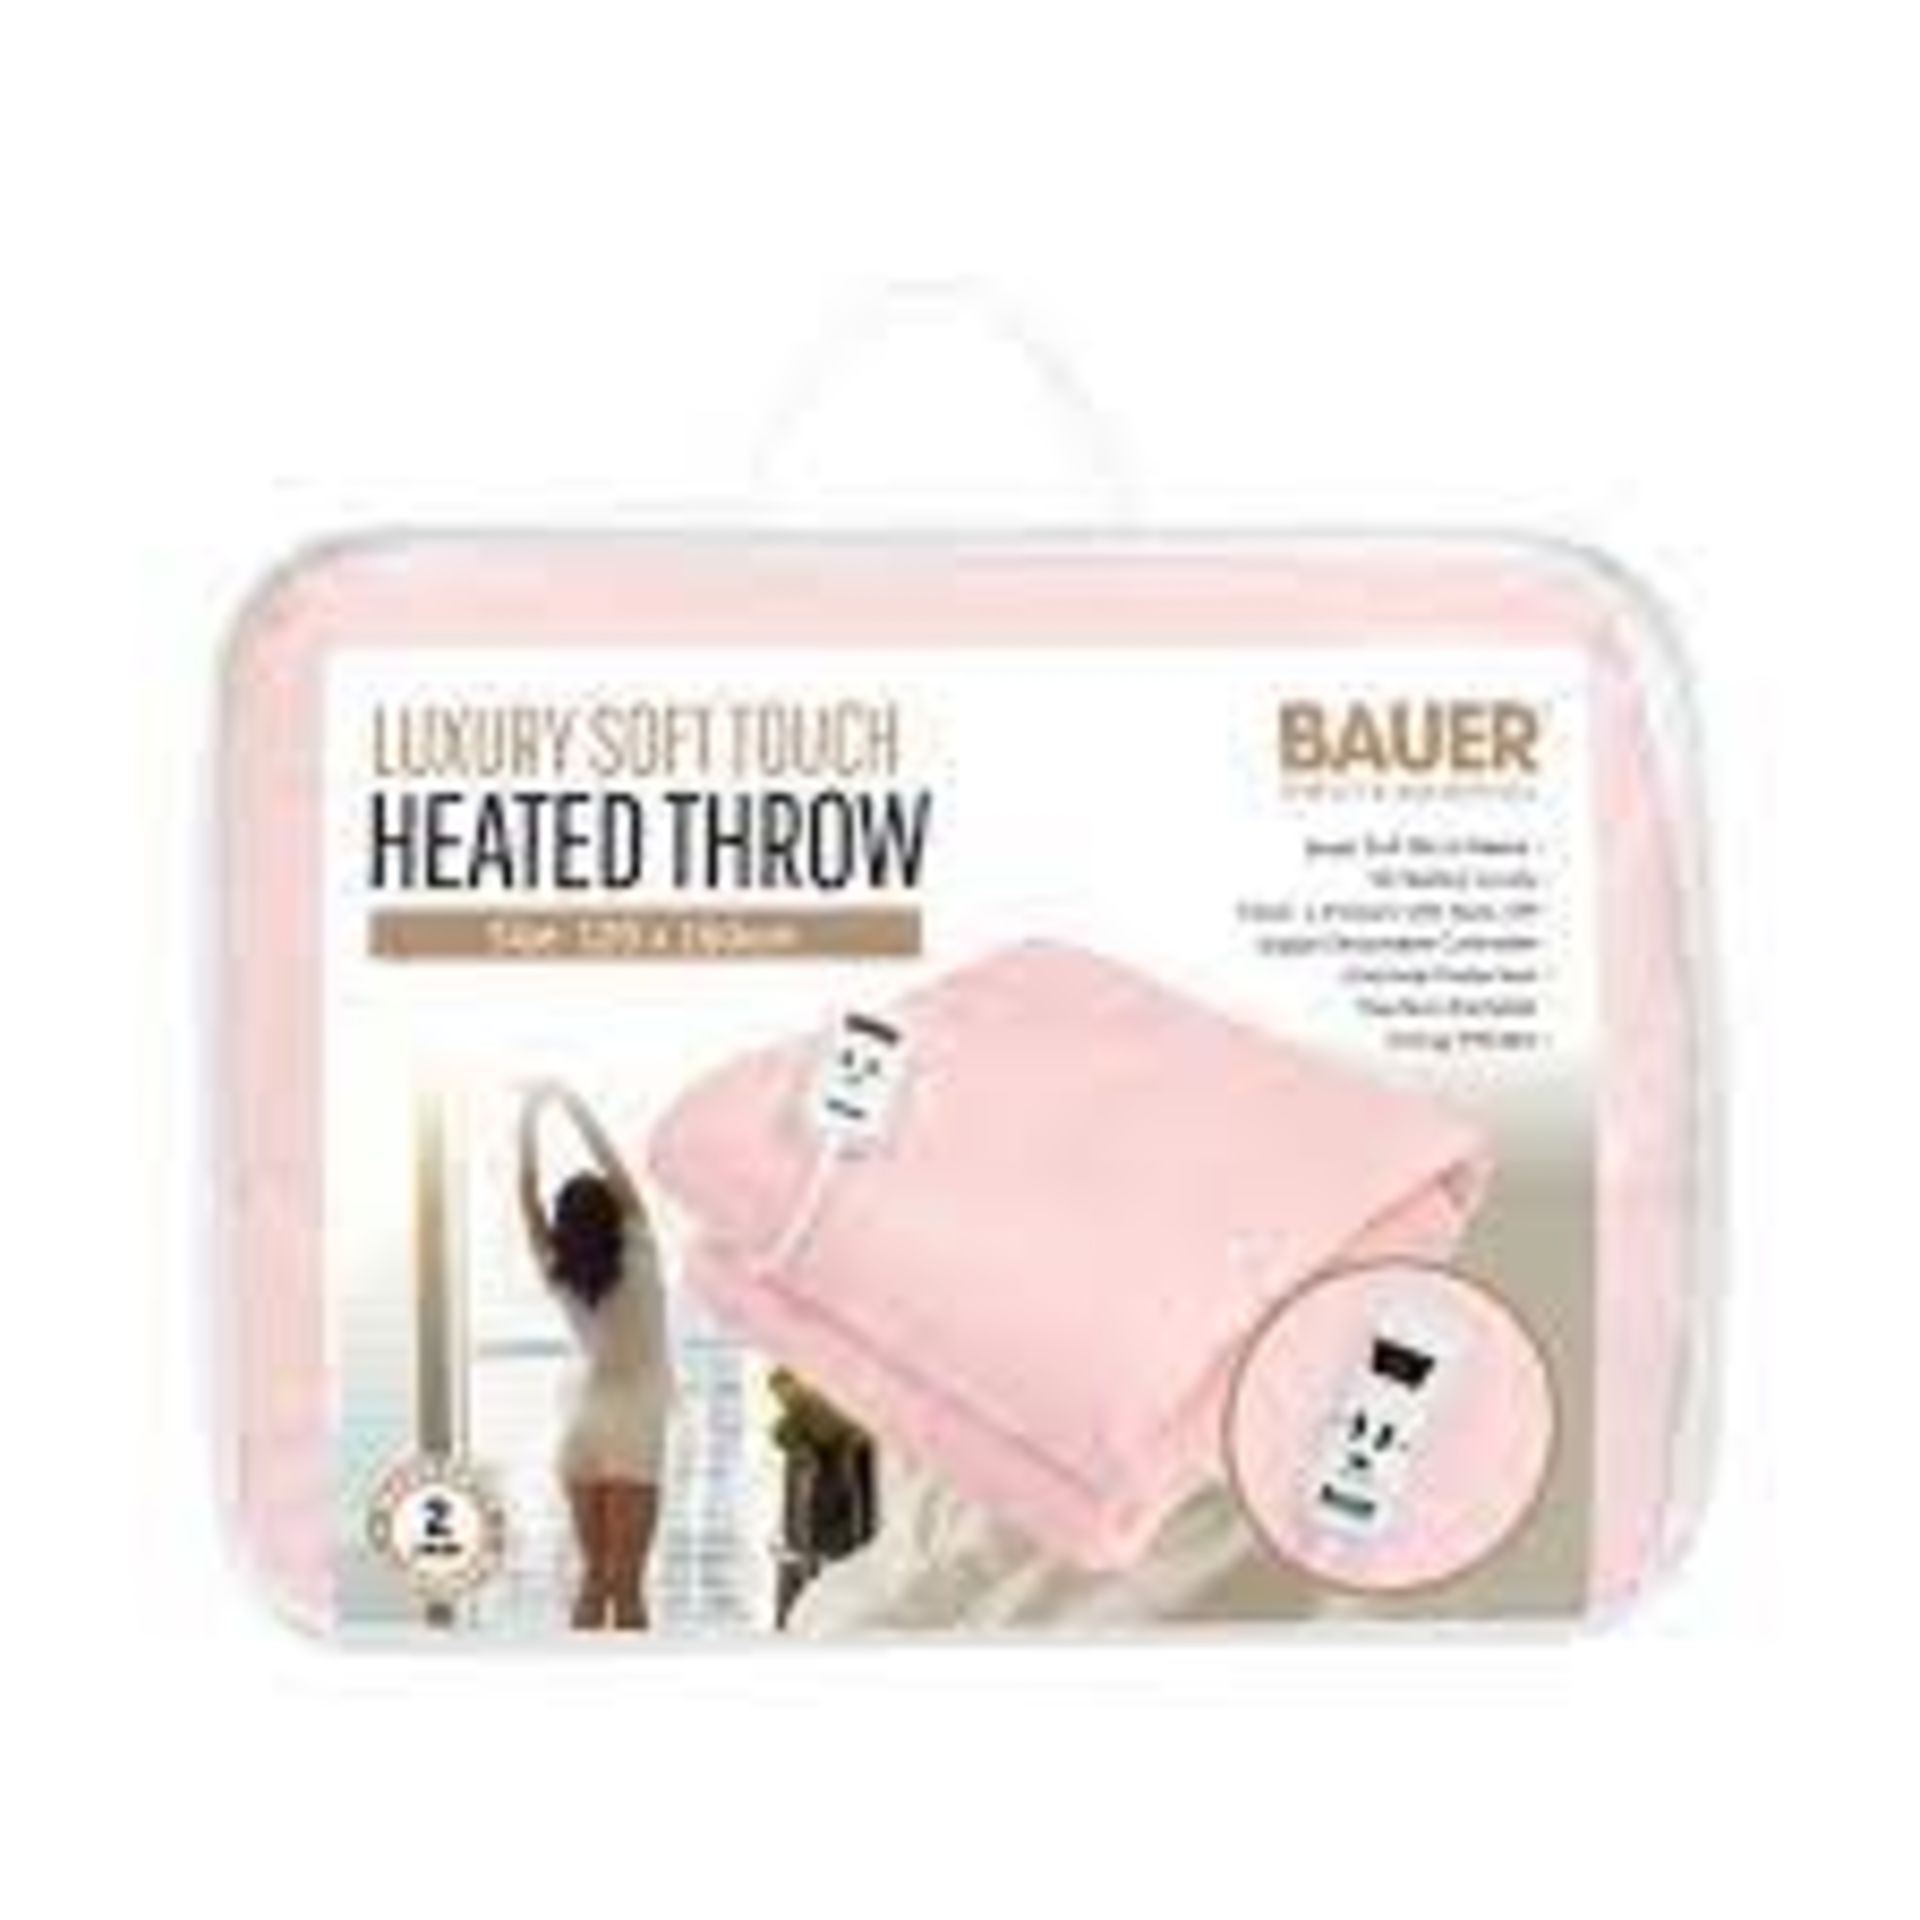 Bauer Professional Luxury Soft Touch Heated Throw Pink - PCK